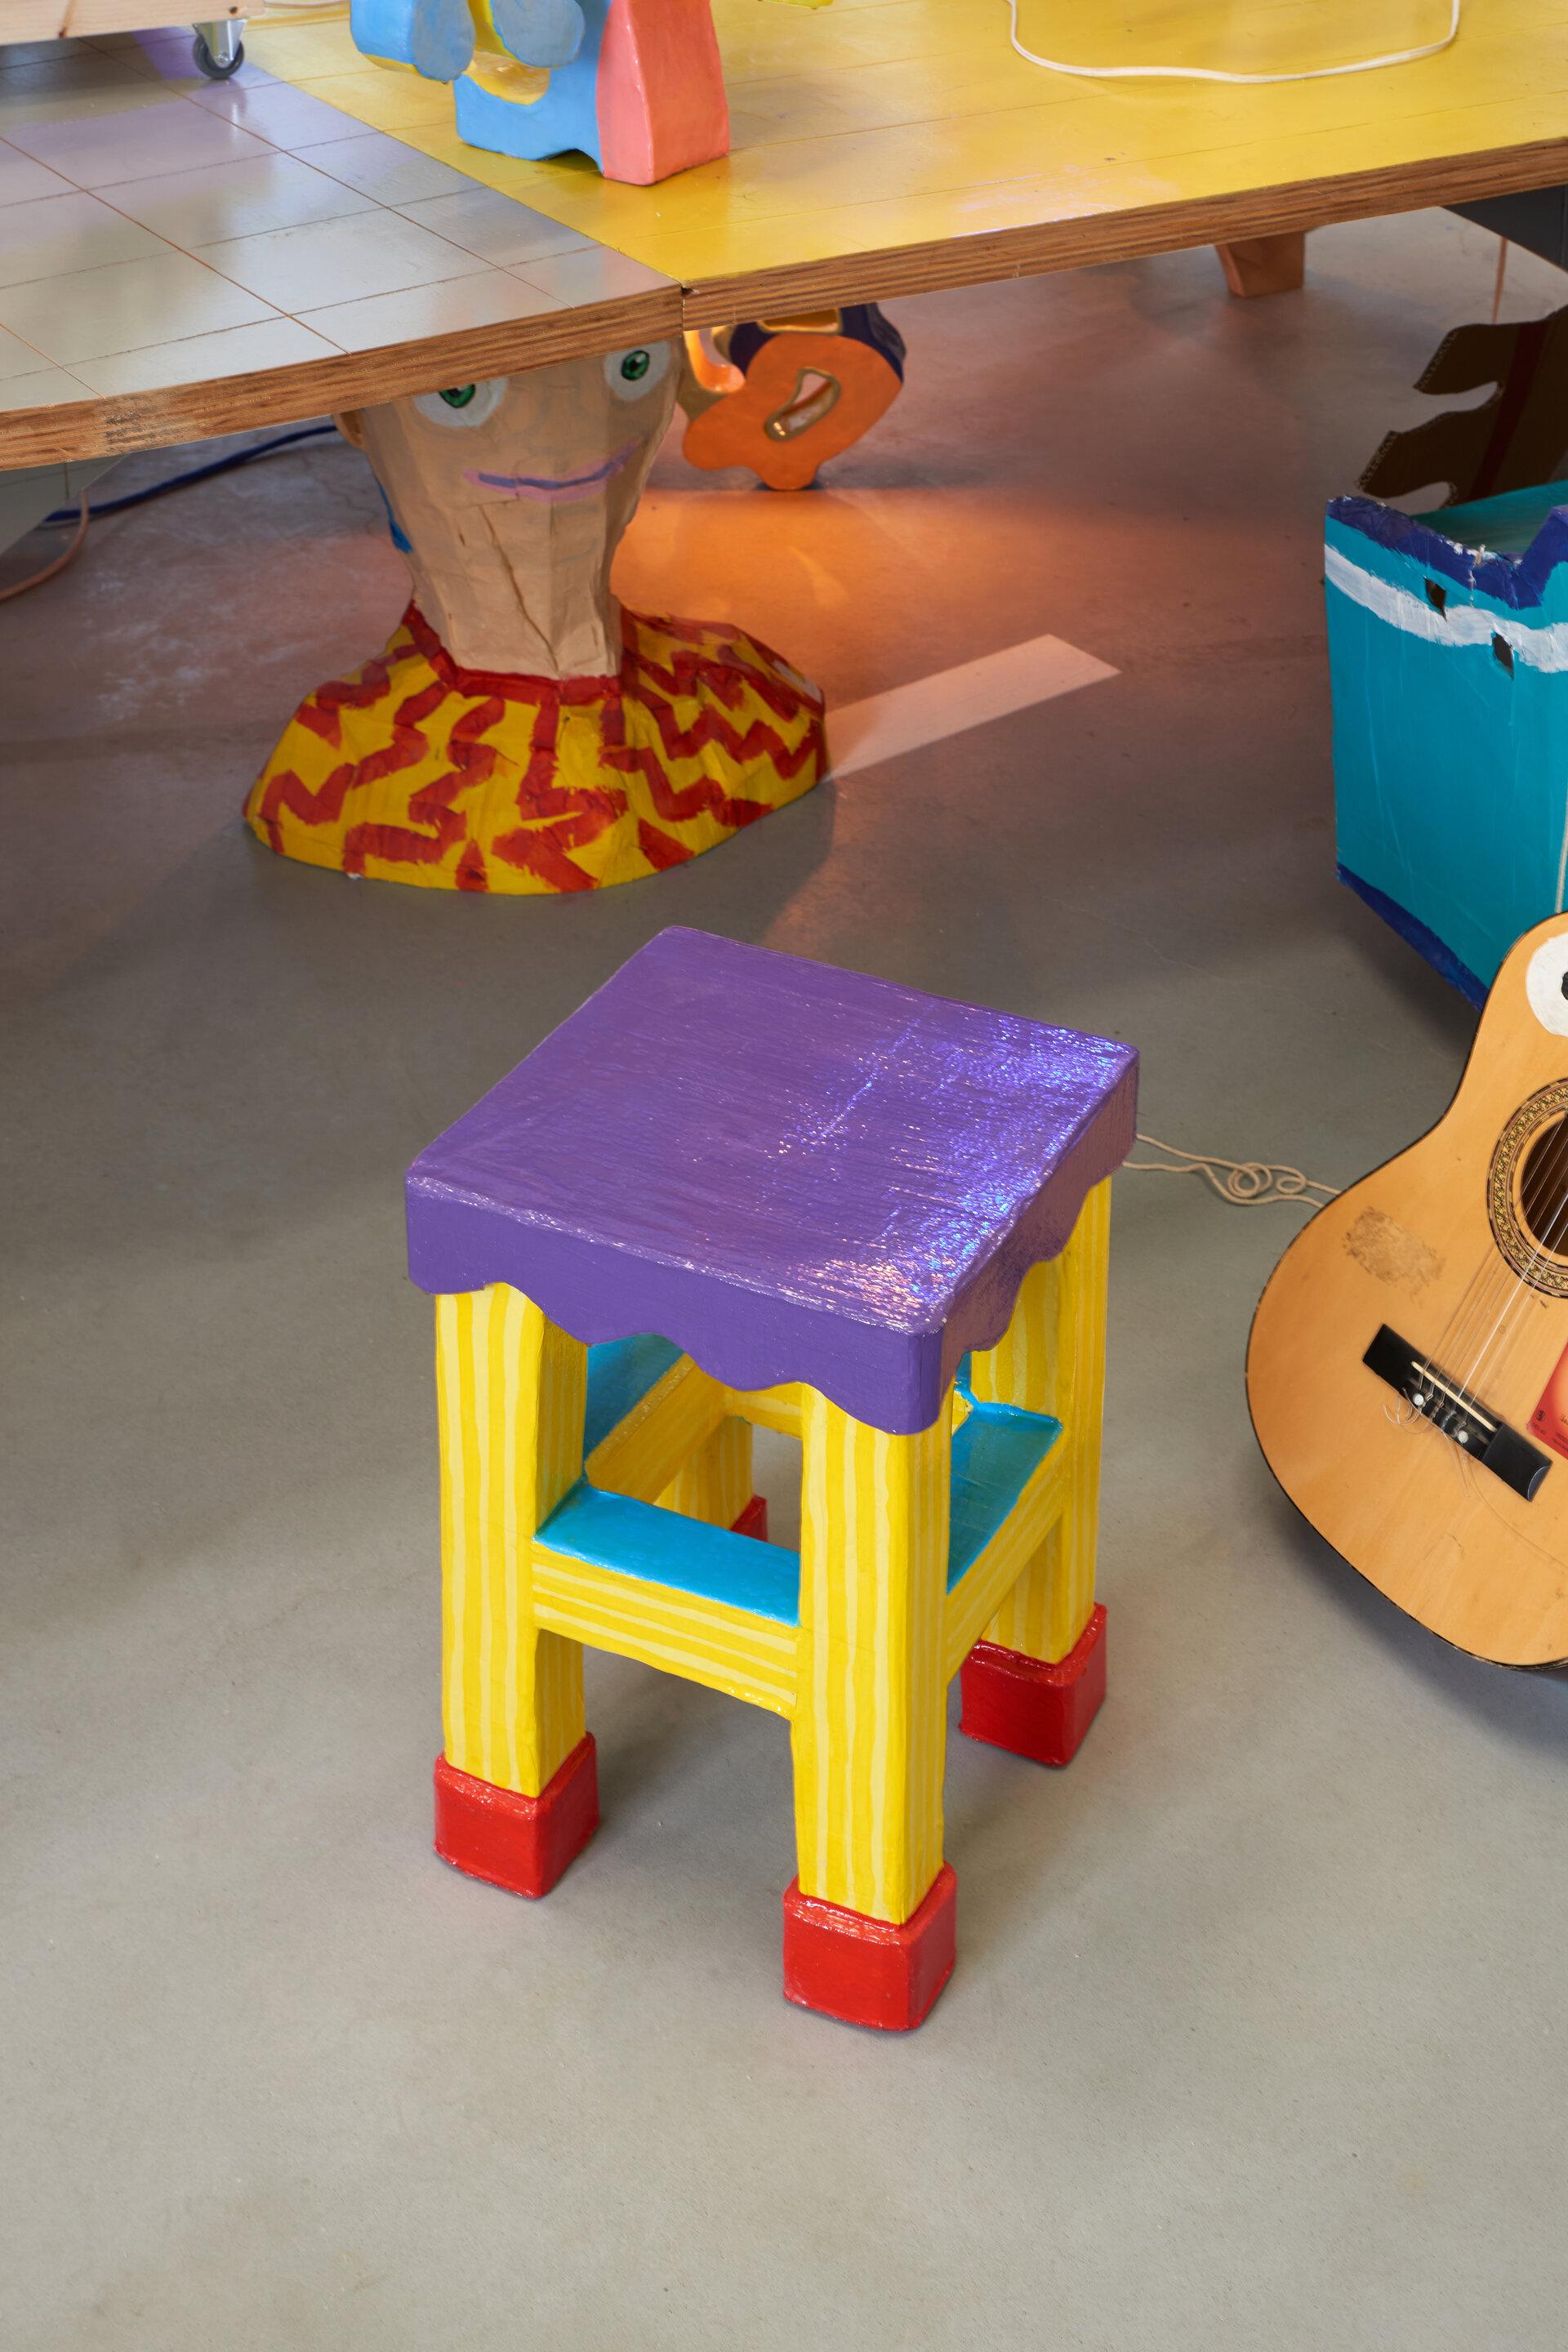 If David Hockney designed furniture for a Mario game, the Strong Paper Stool would emerge in daily life, blurring the line between reality and virtuality. With its vibrant colors and cut-out shapes, this stool reinforces the notion of living in a